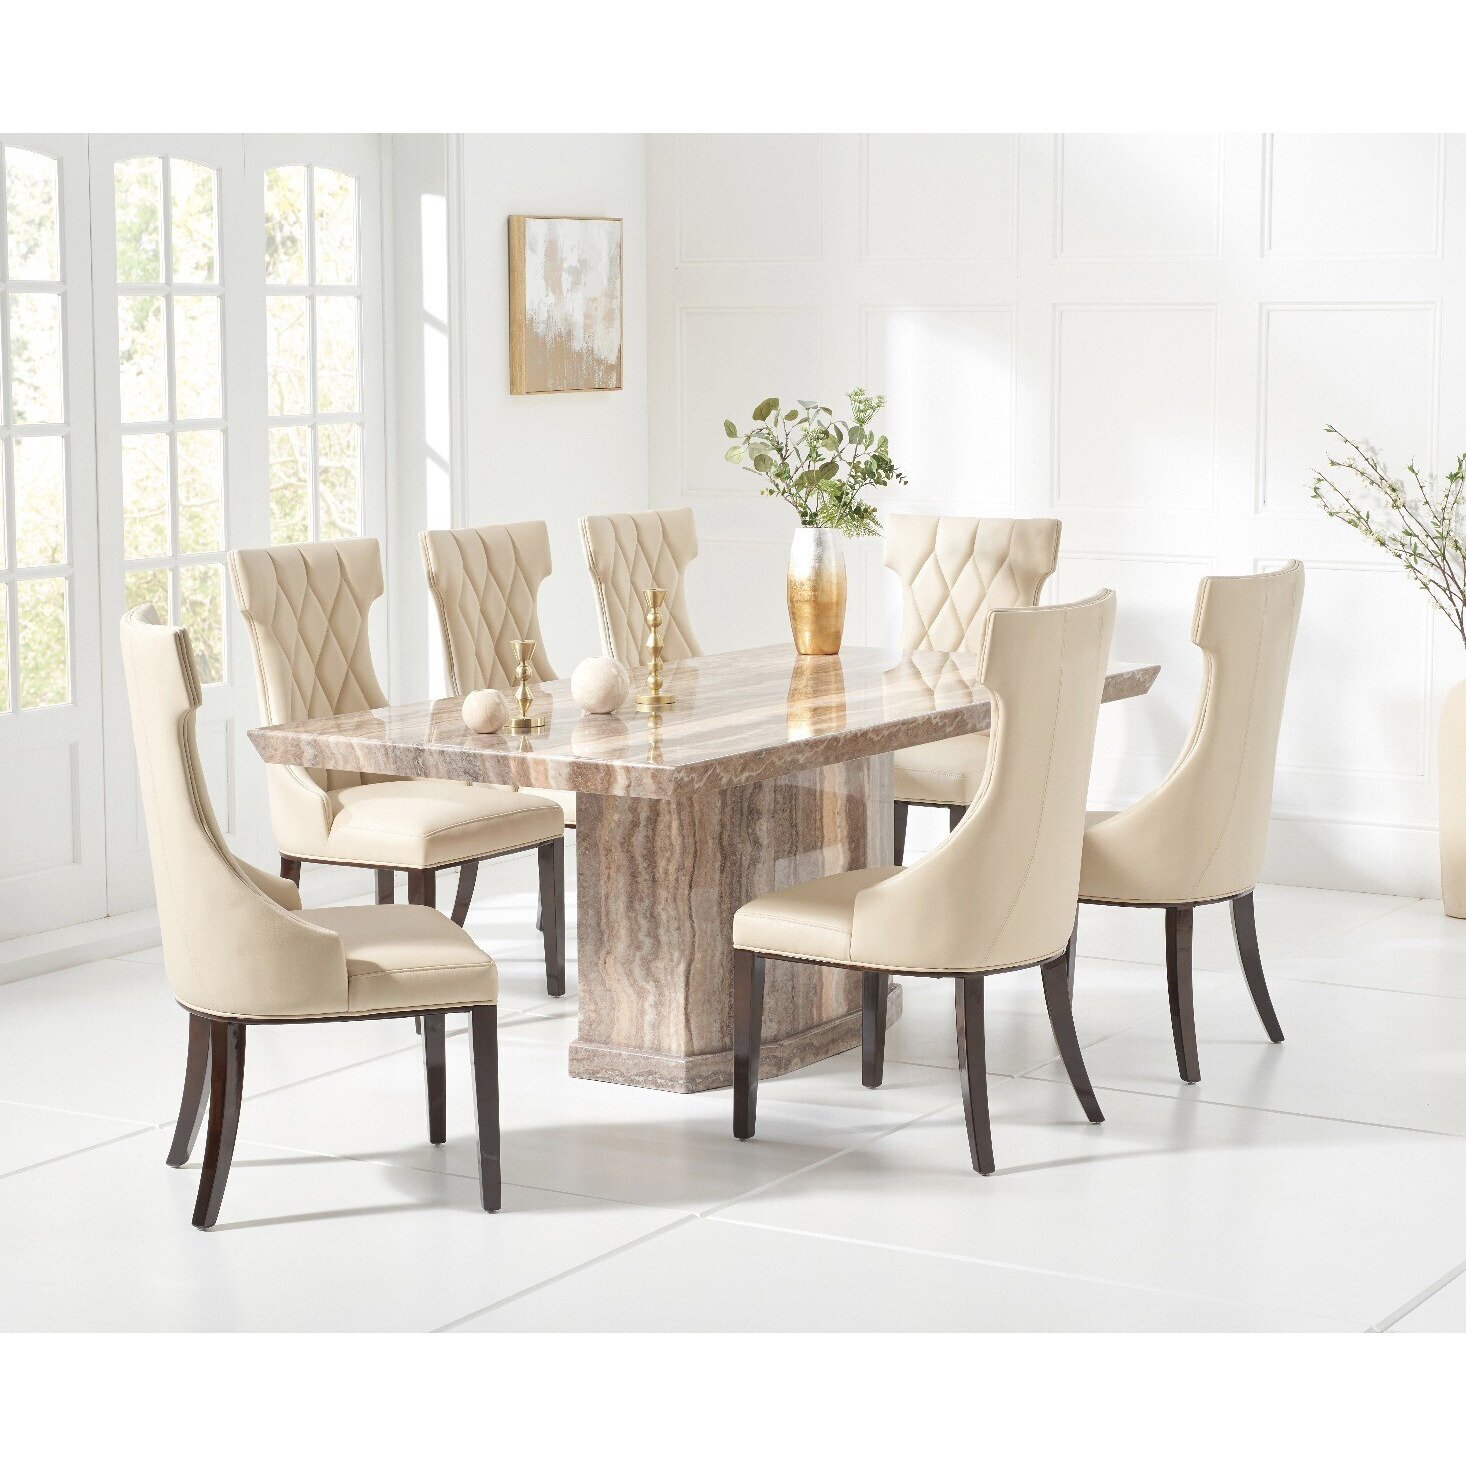 Carvelle 160cm Brown Pedestal Marble Dining Table with 4 Cream Sophia Chairs